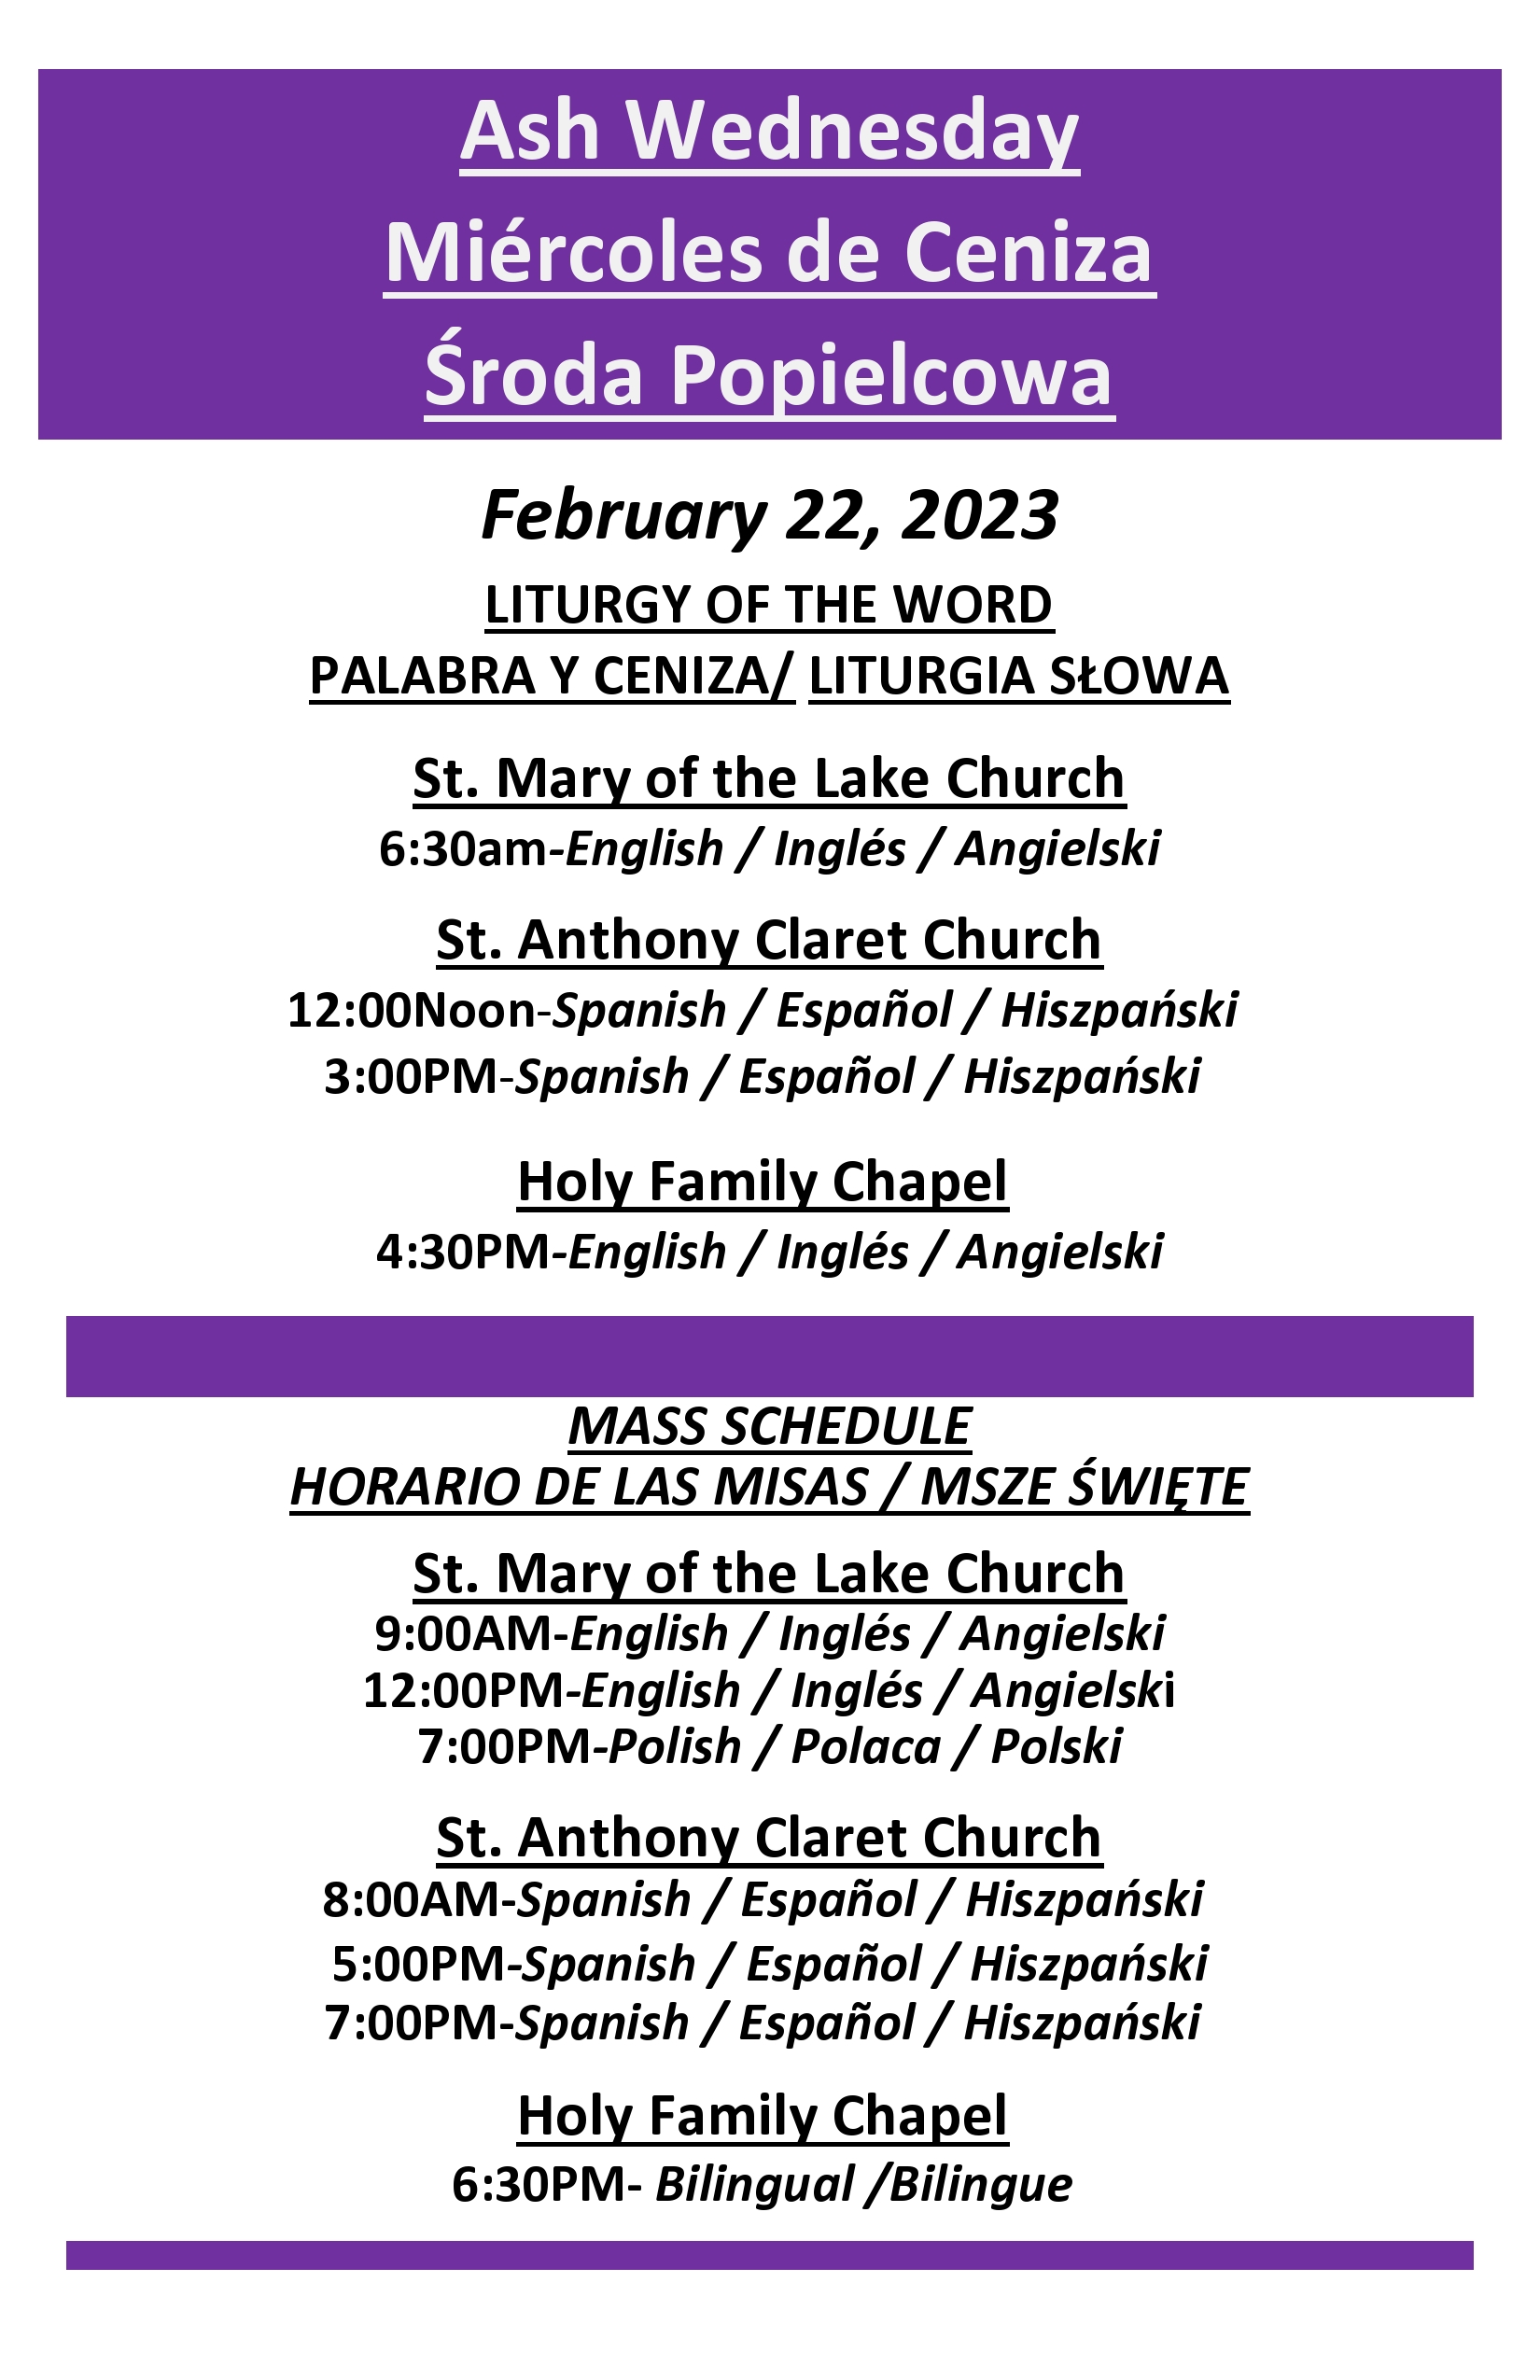 Ash Wednesday Lobby Poster 2023 page0001